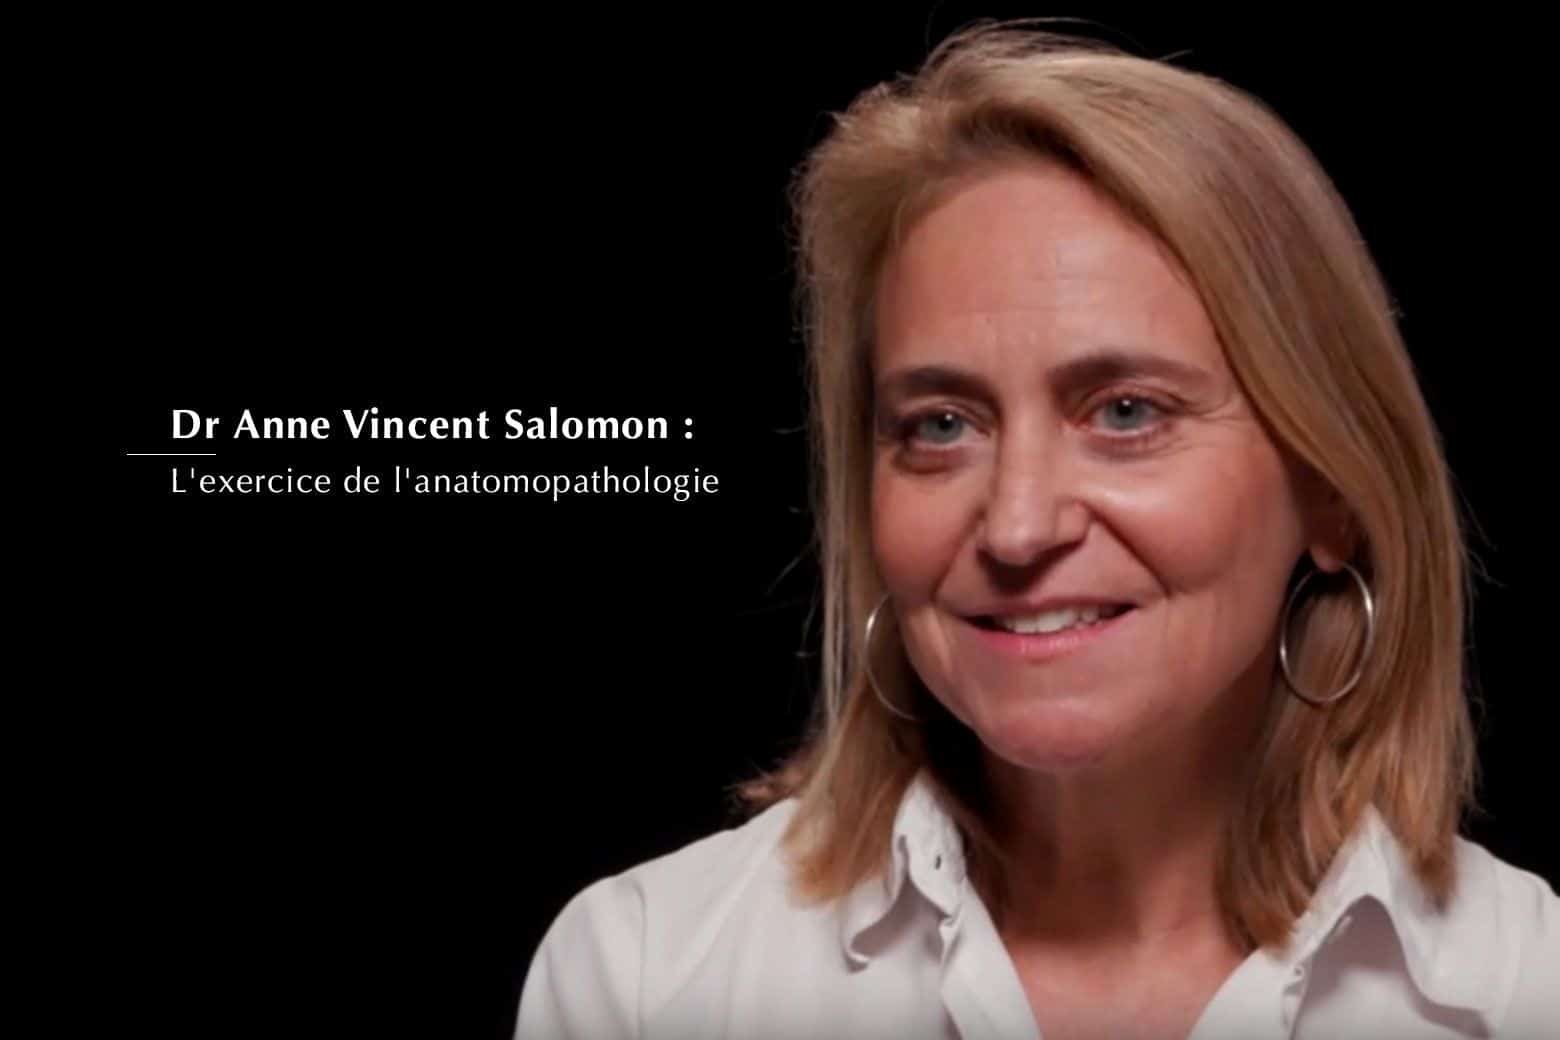 Dr Anne Vincent-Salomon: Anatomopathologist and head of department at the Curie Institute